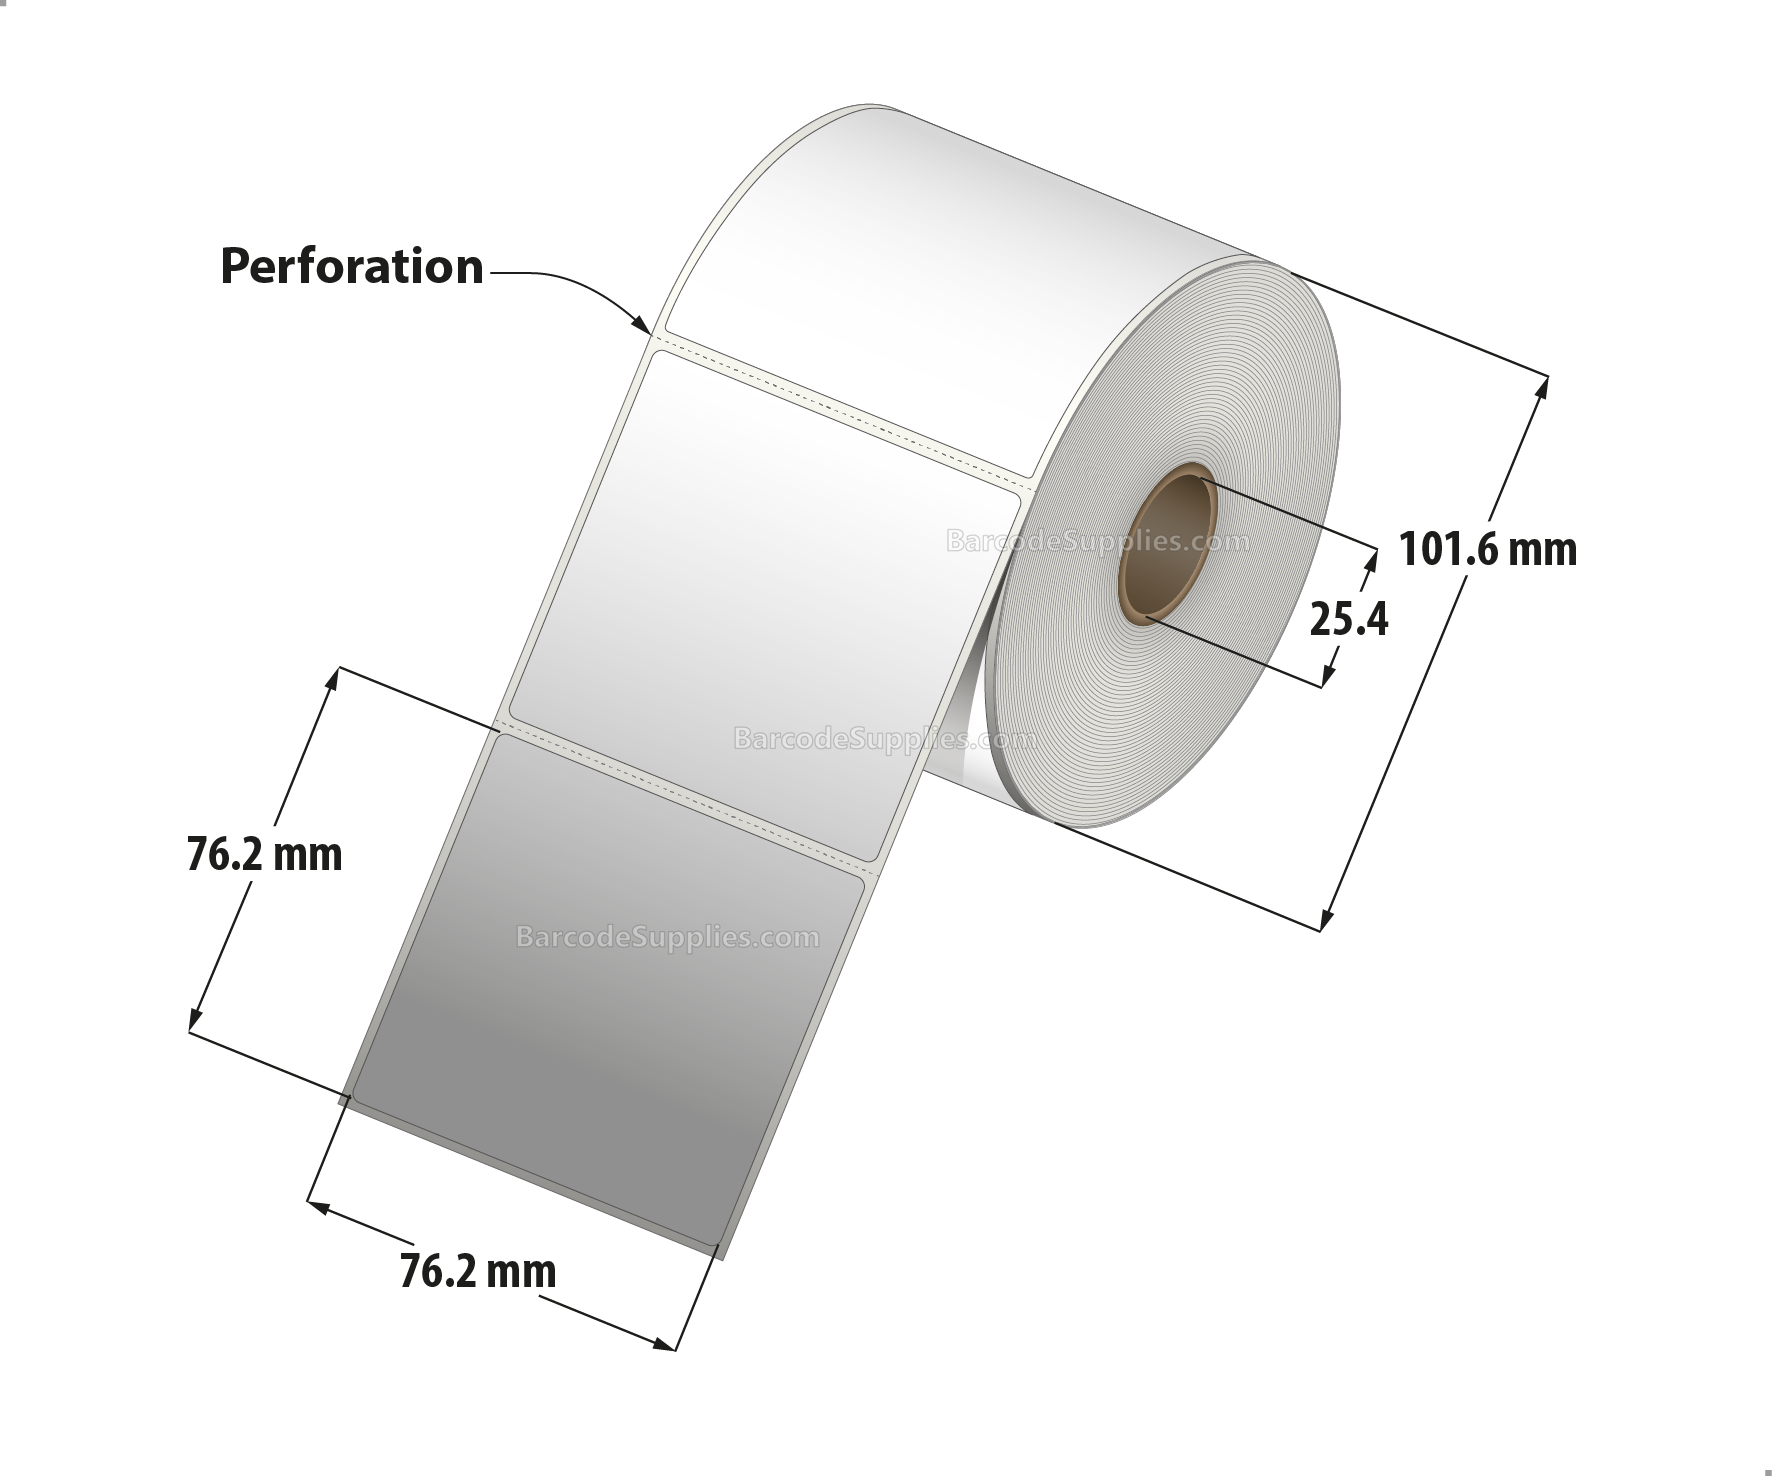 3 x 3 Direct Thermal White Labels With Acrylic Adhesive - Perforated - 500 Labels Per Roll - Carton Of 12 Rolls - 6000 Labels Total - MPN: RD-3-3-500-1